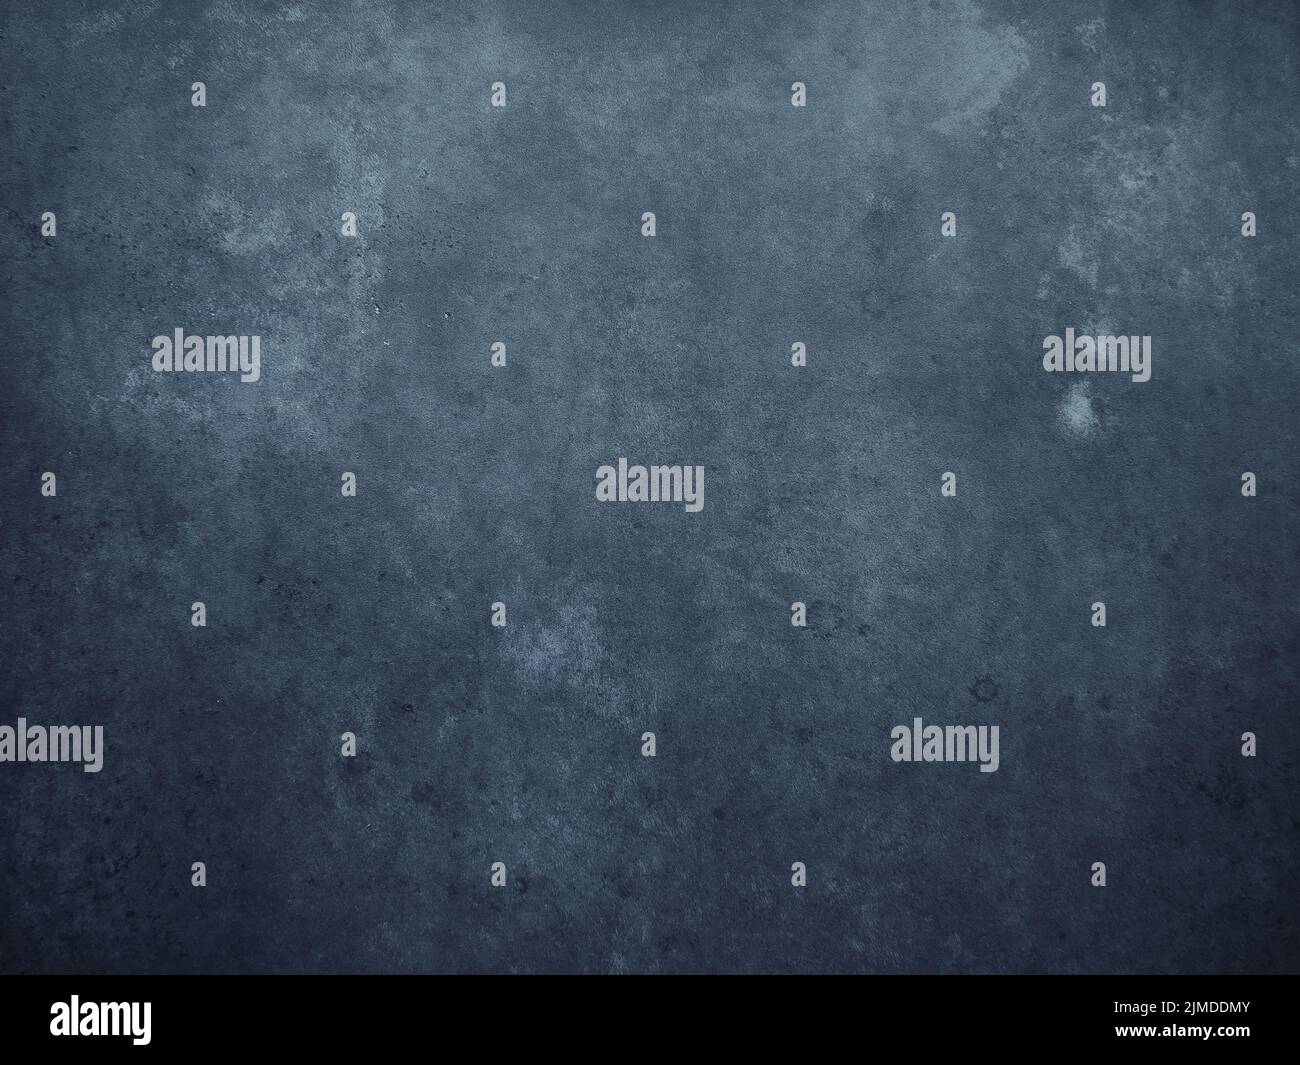 Dark Blue Abstract Background. Grunge Surface Decorative Design Textures And Backgrounds Stock Photo